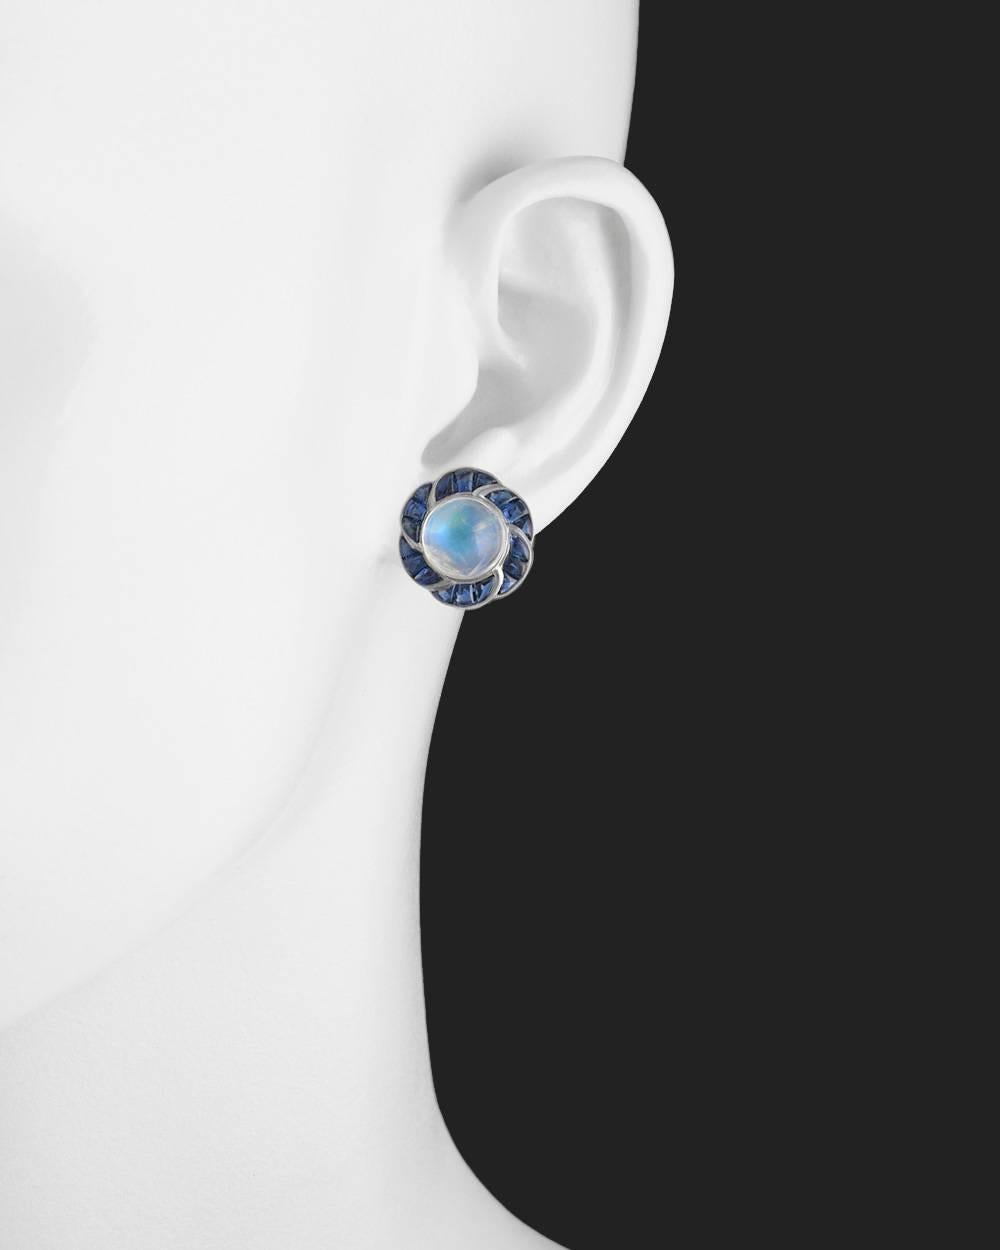 Flower motif earrings, centering a fine round cabochon-cut moonstone surrounded by calibre-cut sapphires, mounted in 18k white gold. Two moonstones weighing 9.95 total carats and 36 sapphires weighing 4.65 total carats. Posts with friction backs for